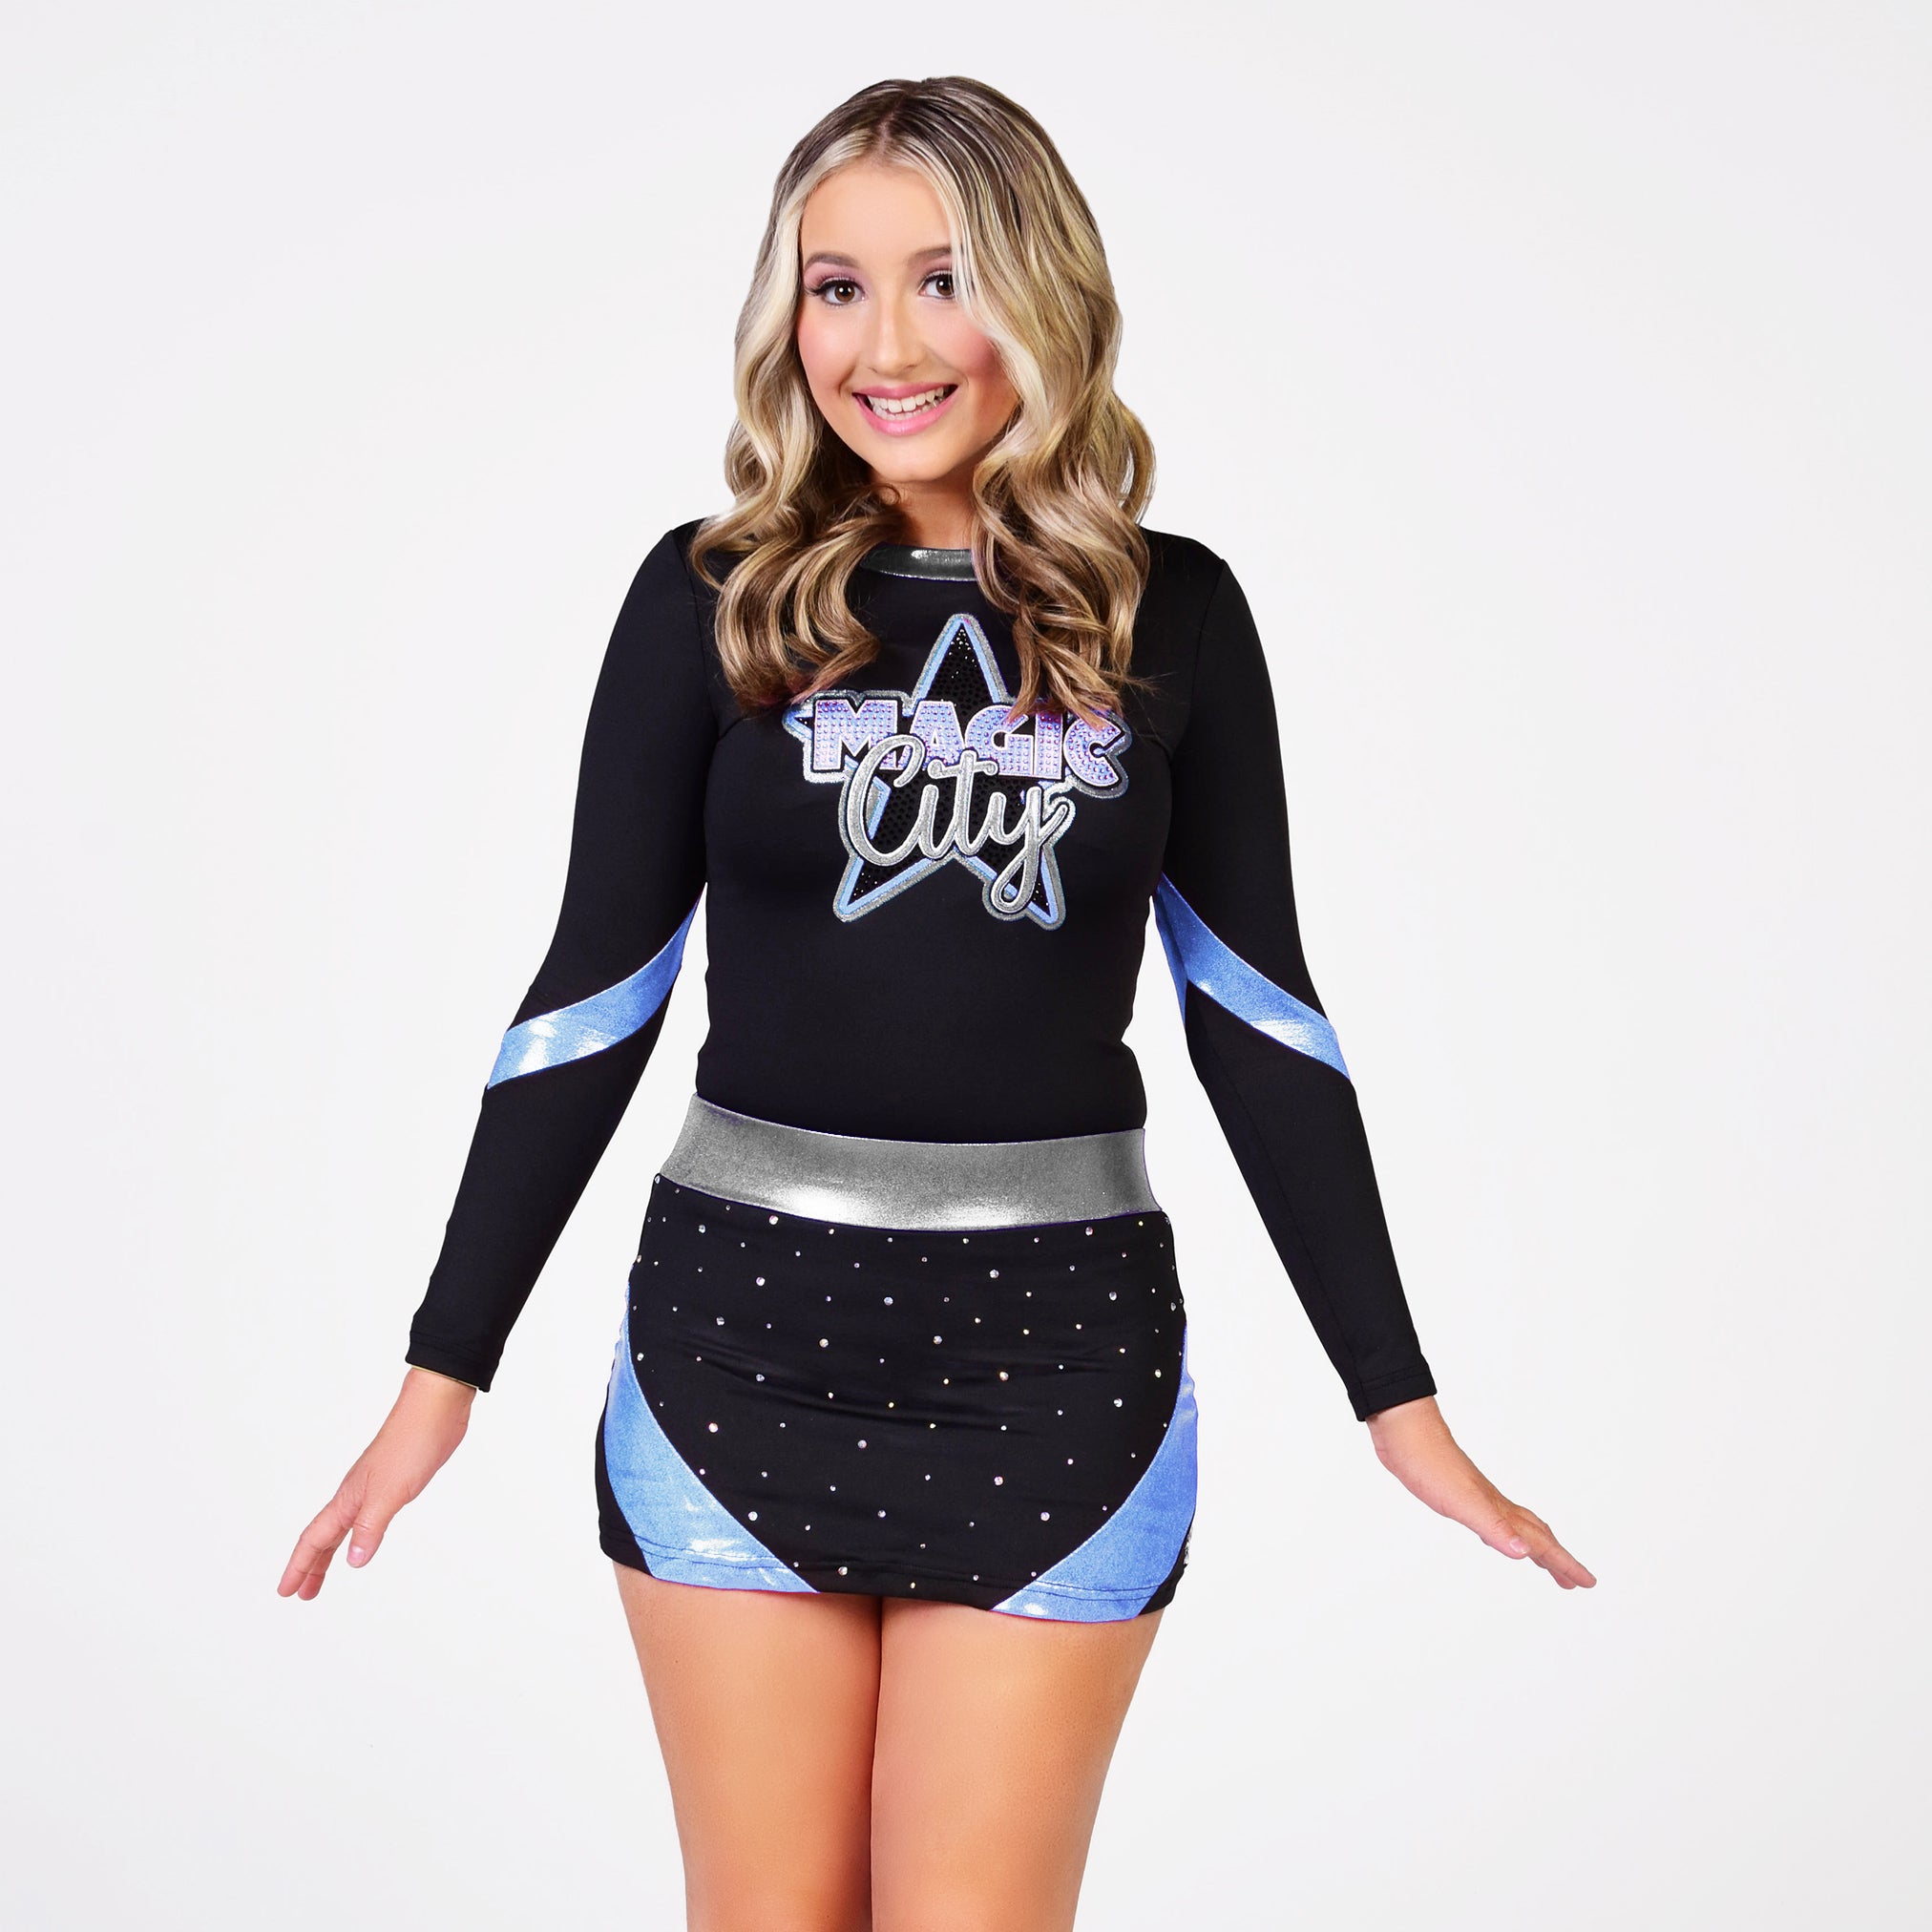 Crossover Uniform with Closed Back - Columbia blue